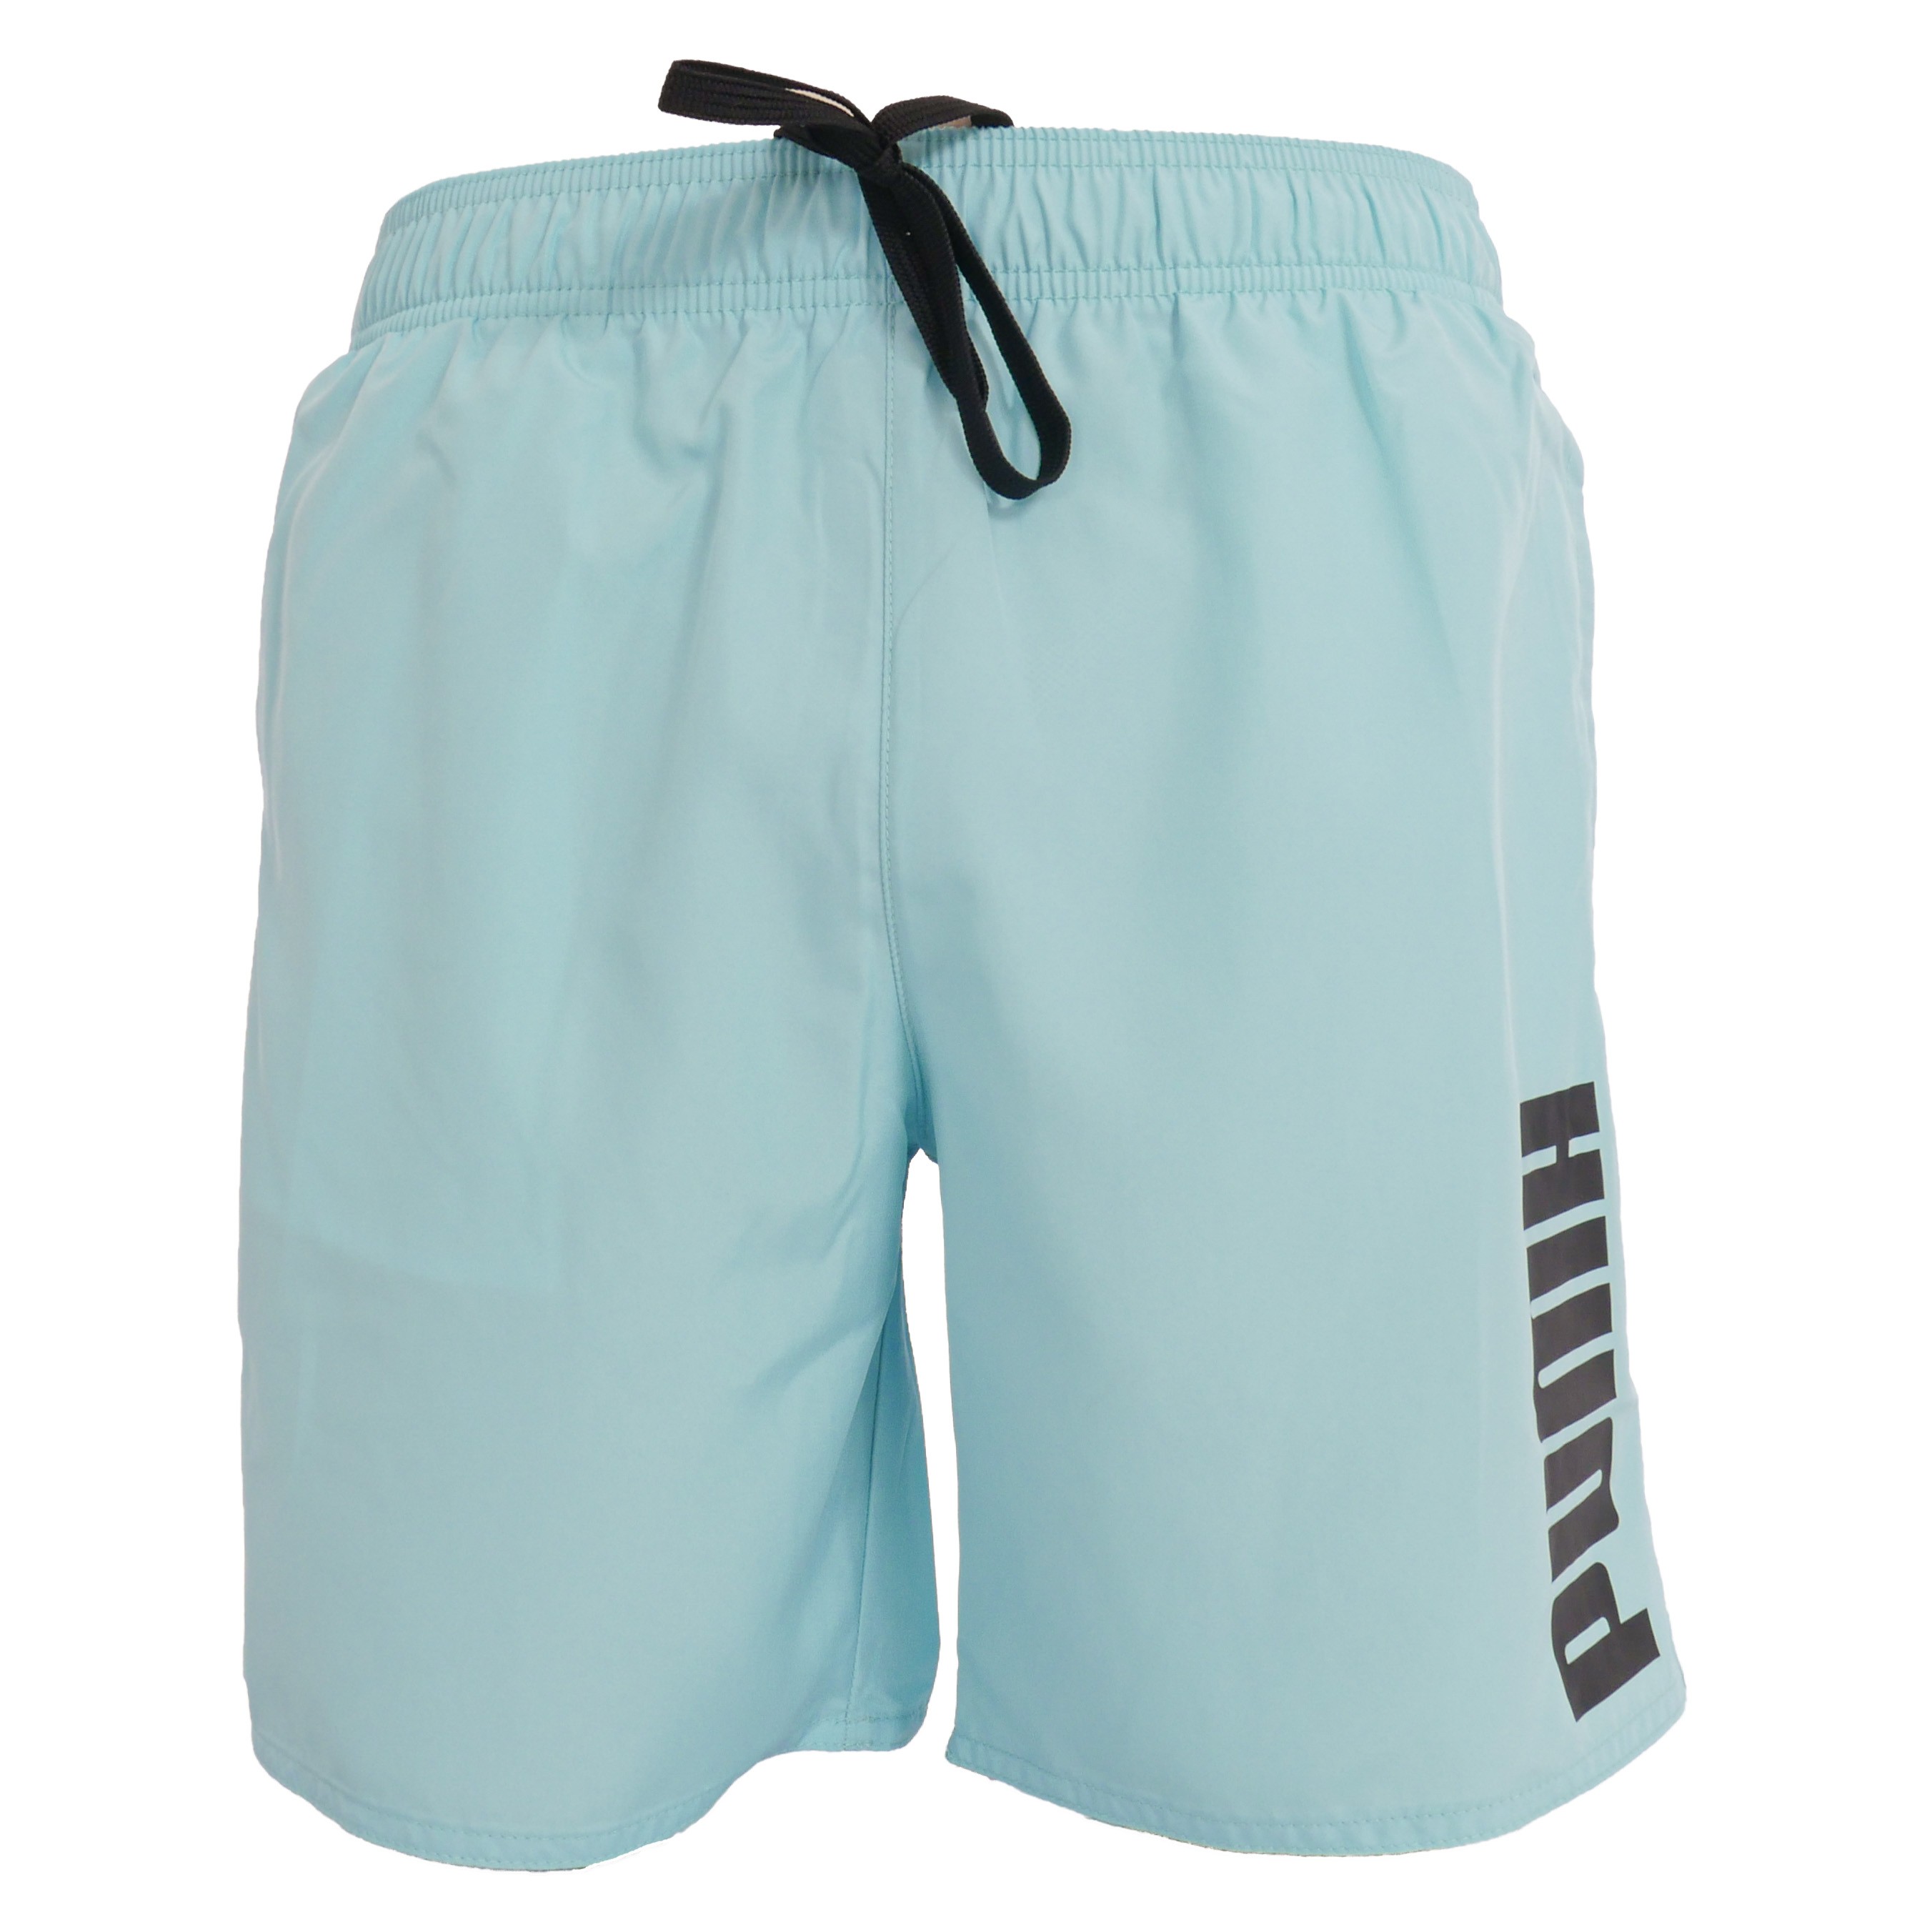 Vintage Men's Shorts for Swimming " Puma Sport Life Style " Collection Turquoise Blue Color Clothing Gender-Neutral Adult Clothing Shorts 